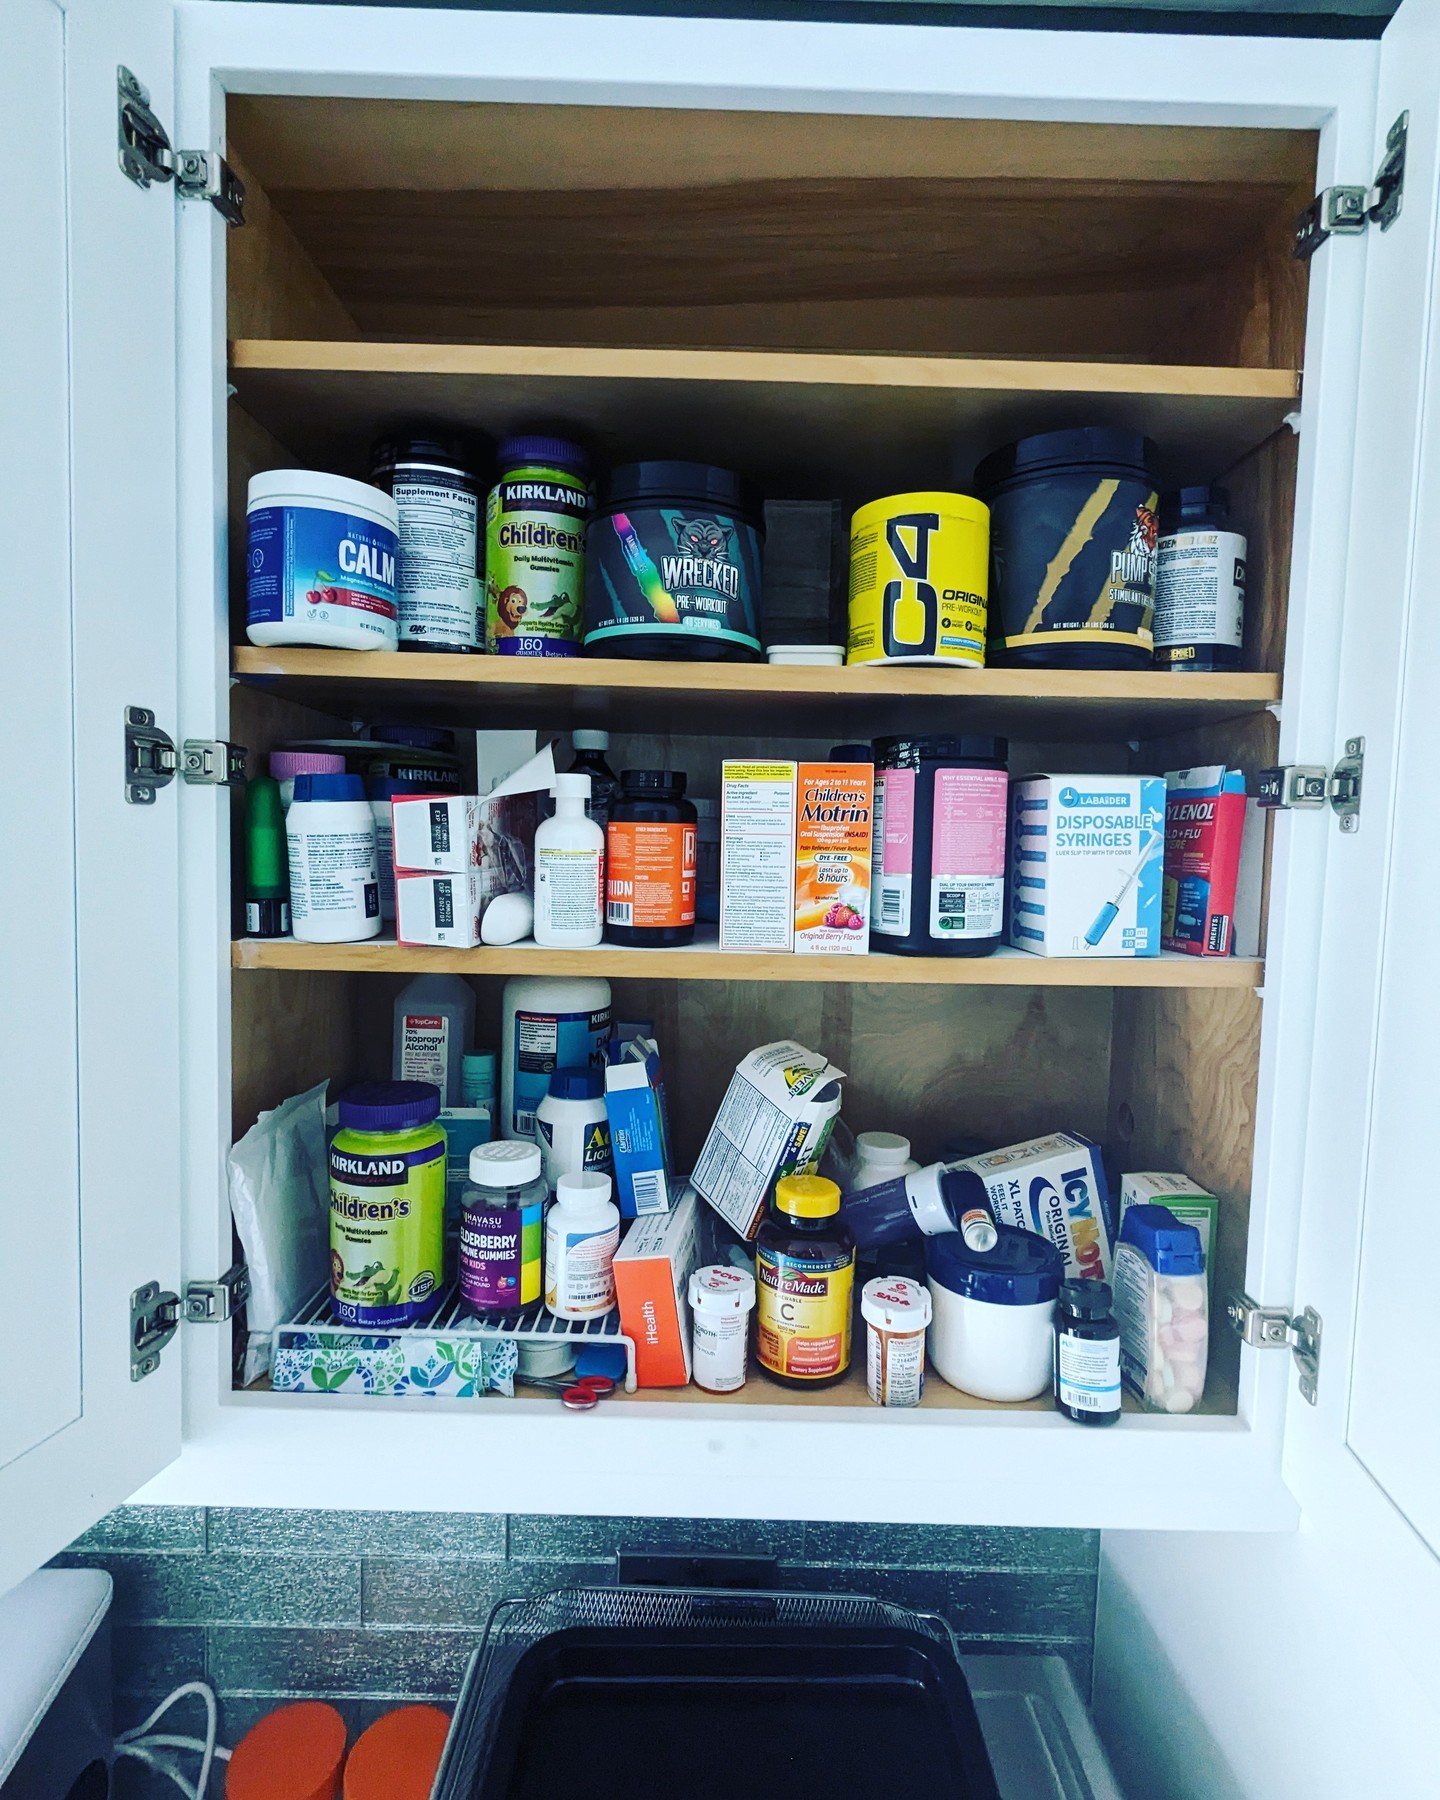 What a difference a few tiered racks and lazy susans can make! Kitchen before and after part one! 

#lightenupandrea #kitchen #kitchenbeforeandafter #professionalorganizer #lazysusan #spicerack #medicineorganization